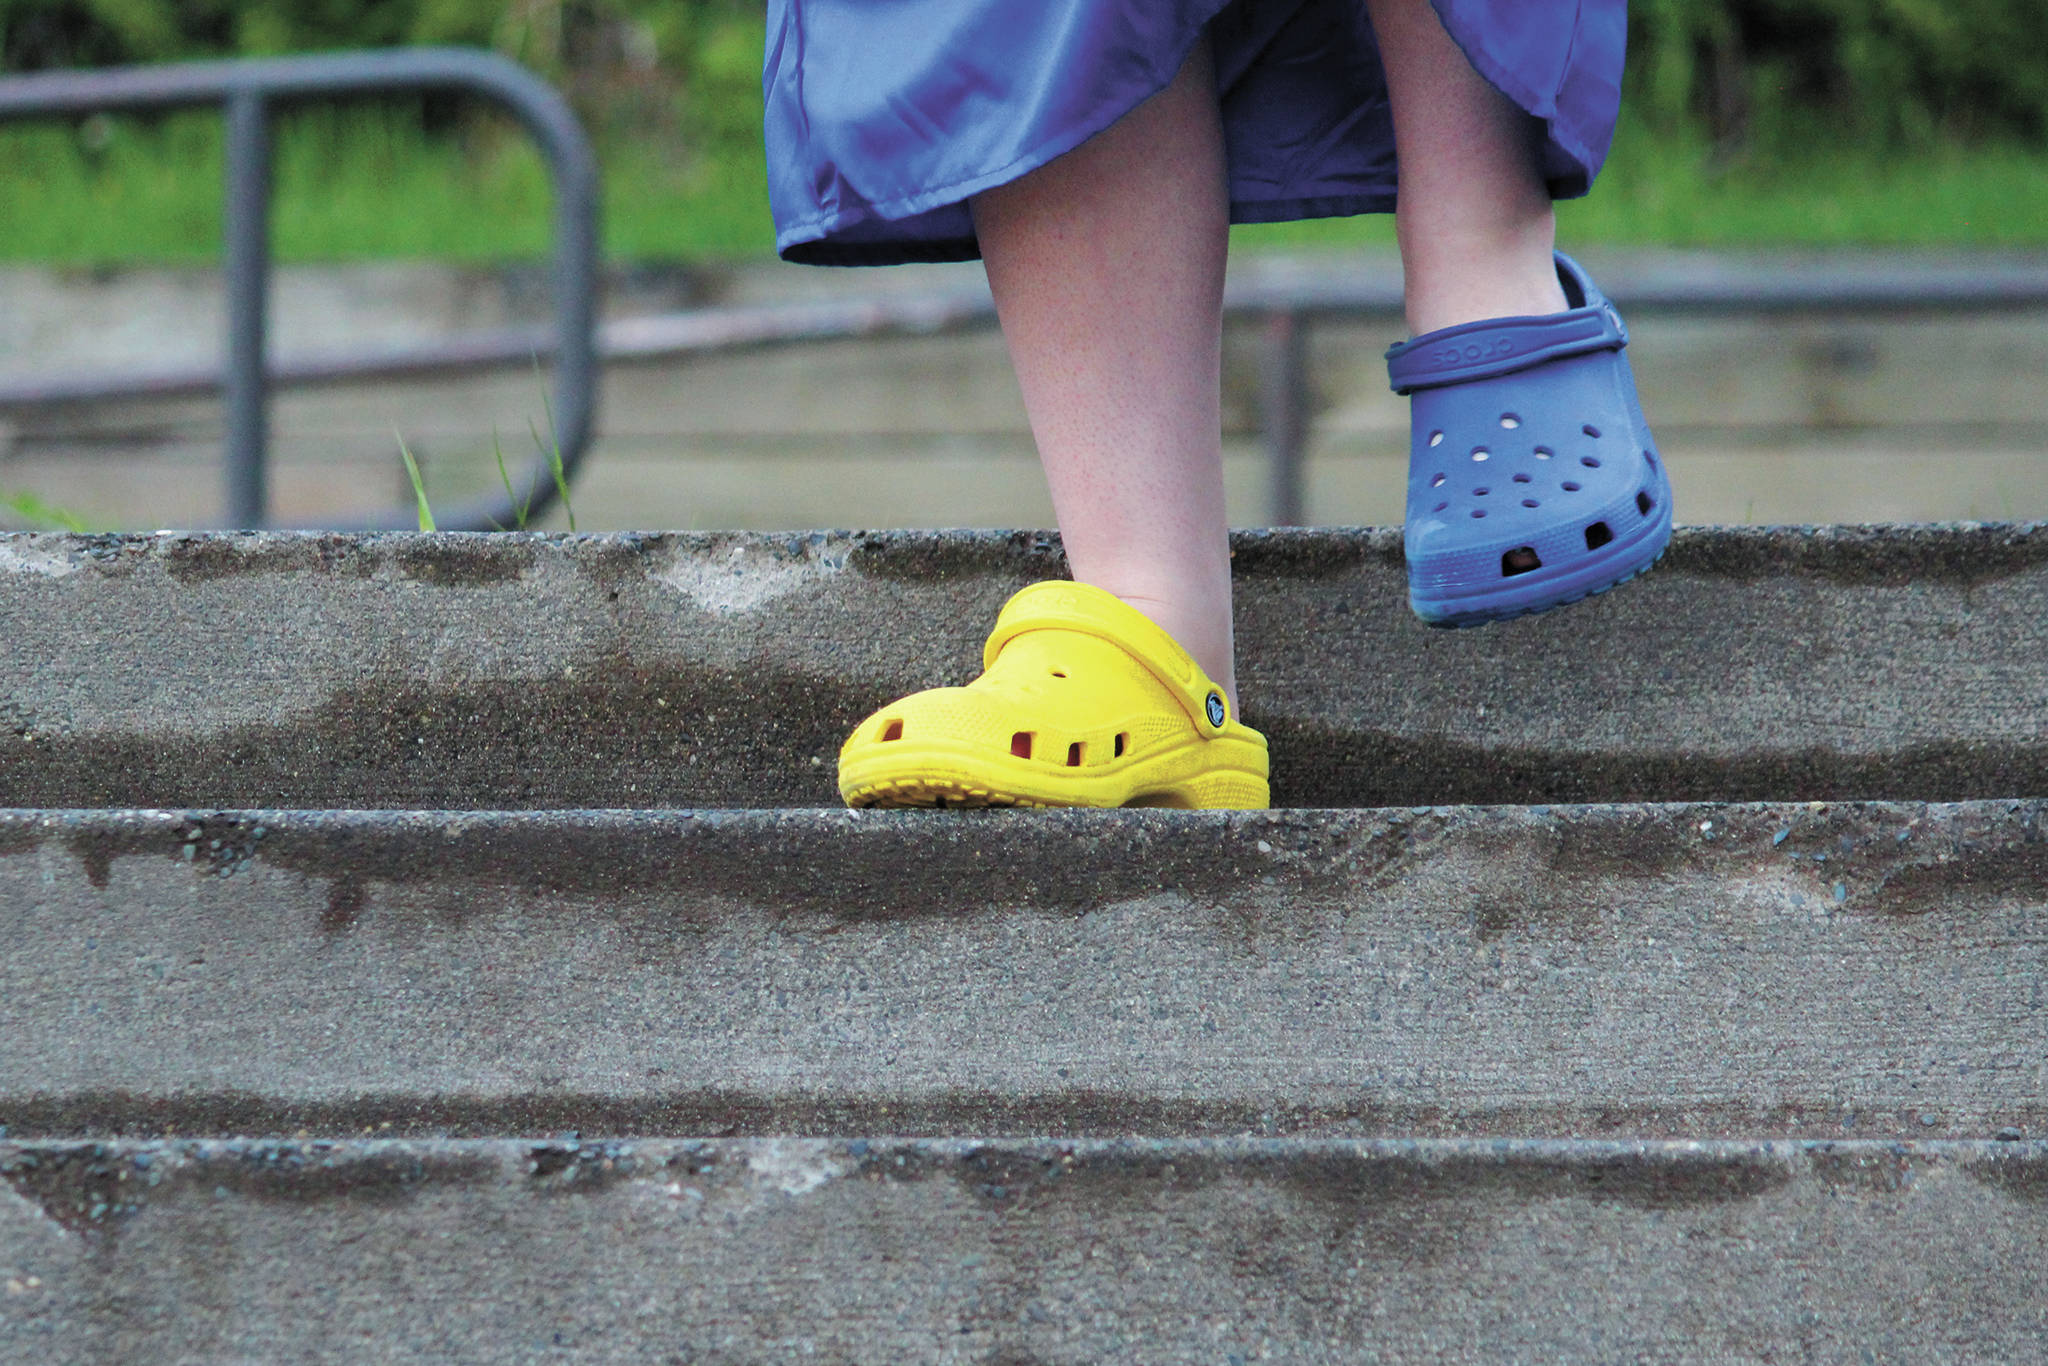 A Homer High School graduate walks down the steps in front of the school wearing Crocs in the Mariner colors after collecting her diploma during the commencement ceremony Monday, May 18, 2020 at the school in Homer, Alaska. (Photo by Megan Pacer/Homer News)